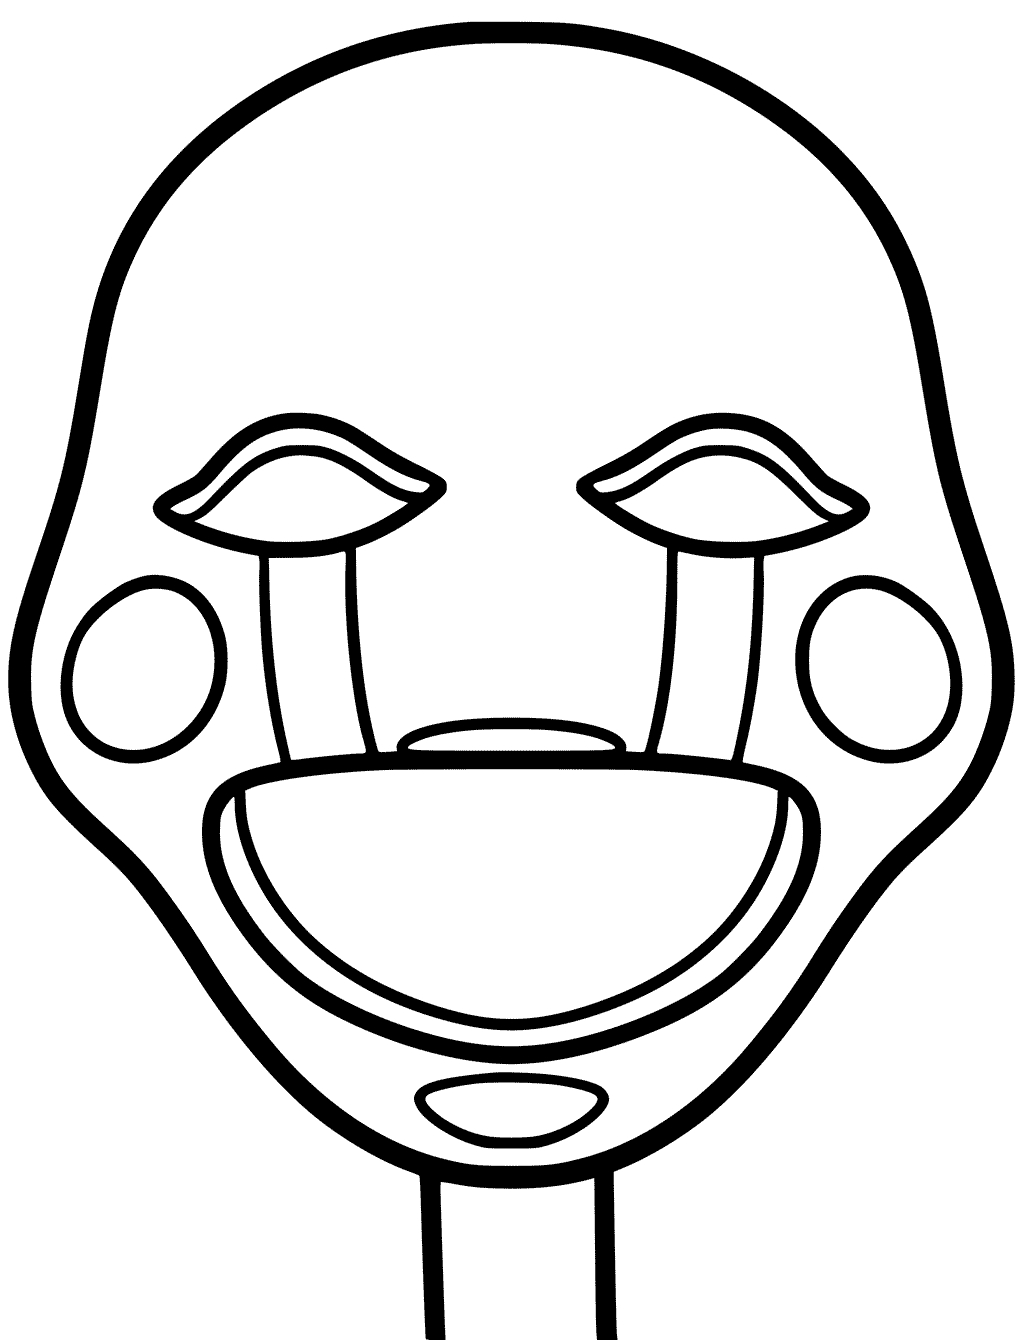 Fnaf Coloring Pages At Getcolorings | Free Printable Colorings serapportantà Coloriage Fnaf